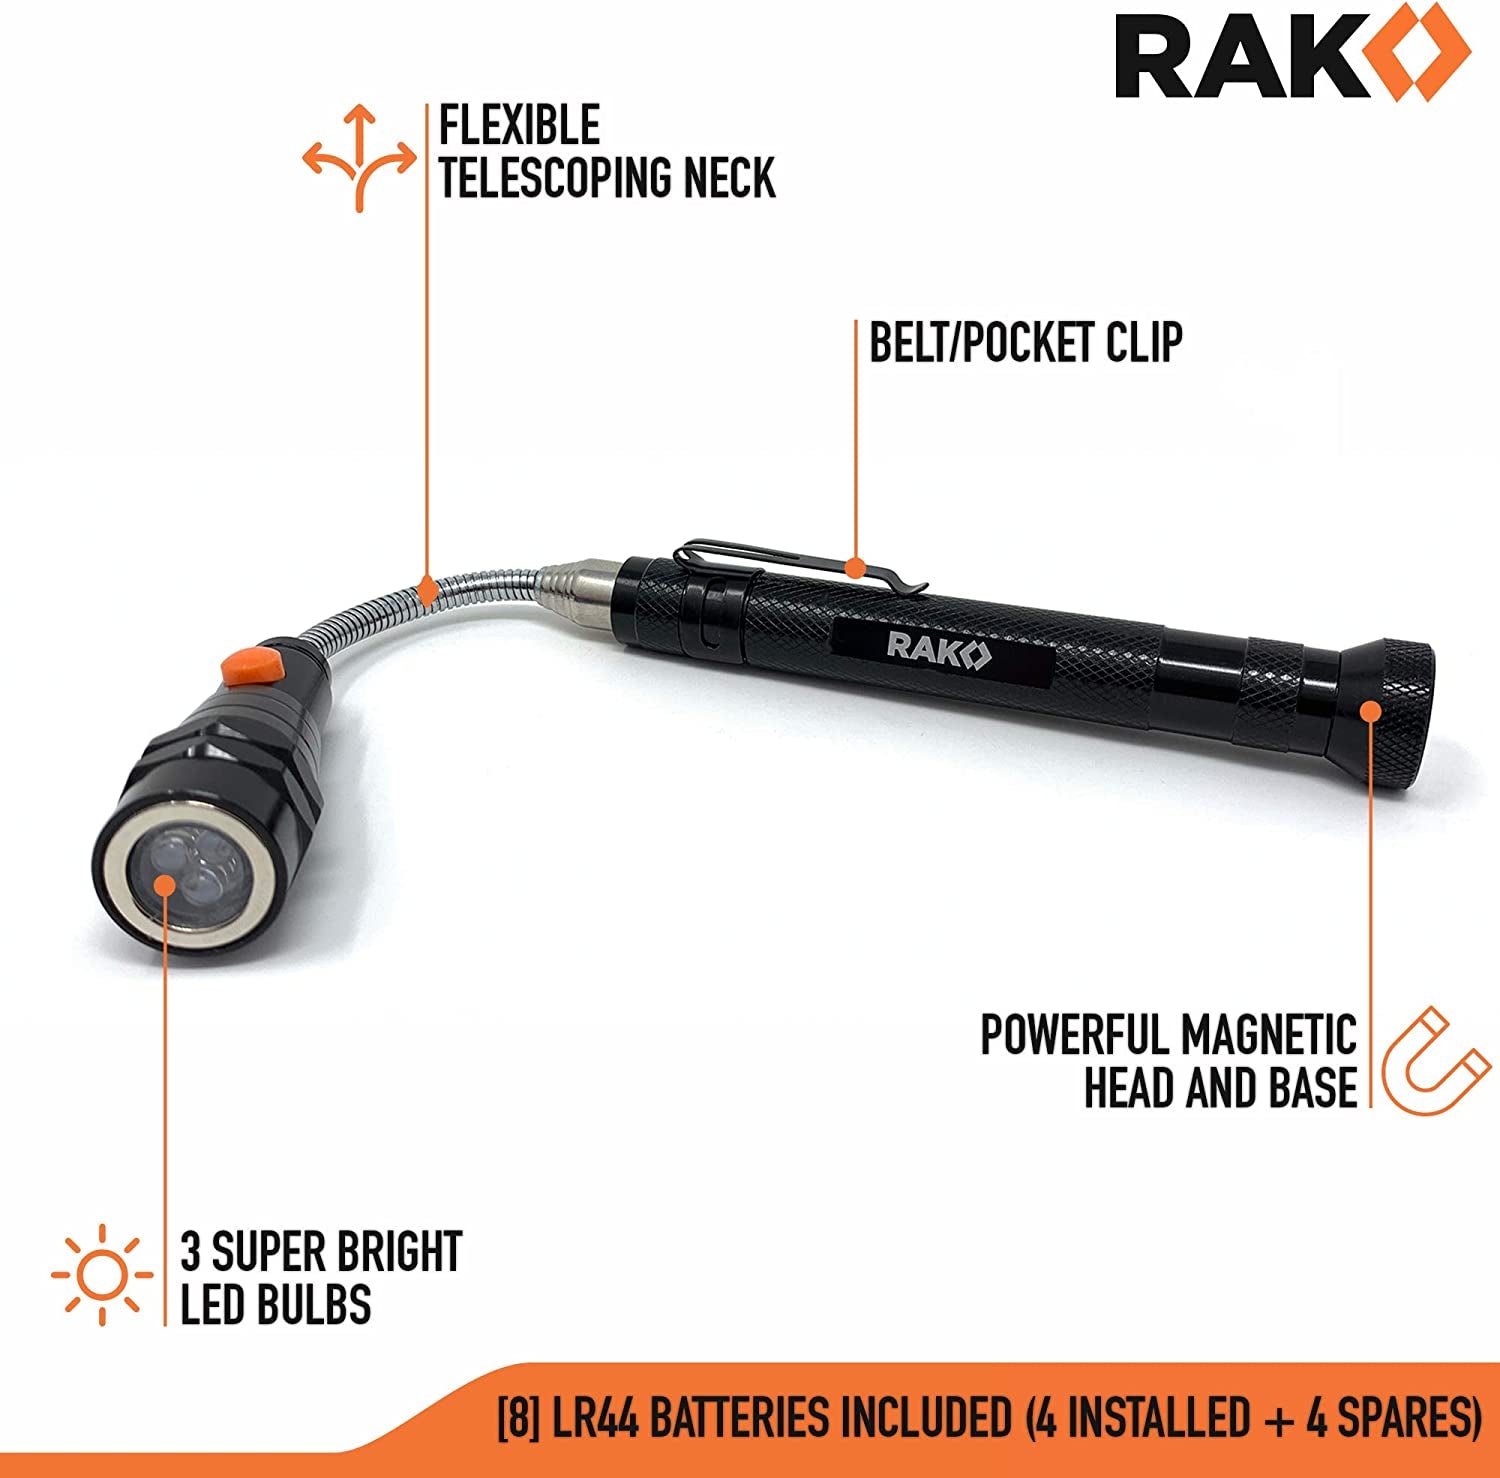 RAK Magnetic Pickup Tool - Telescoping Magnet with LED Lights and 22 Inches Extendable Neck - Cool Gadget Gifts for Dad, Husband, Grandpa, Handyman